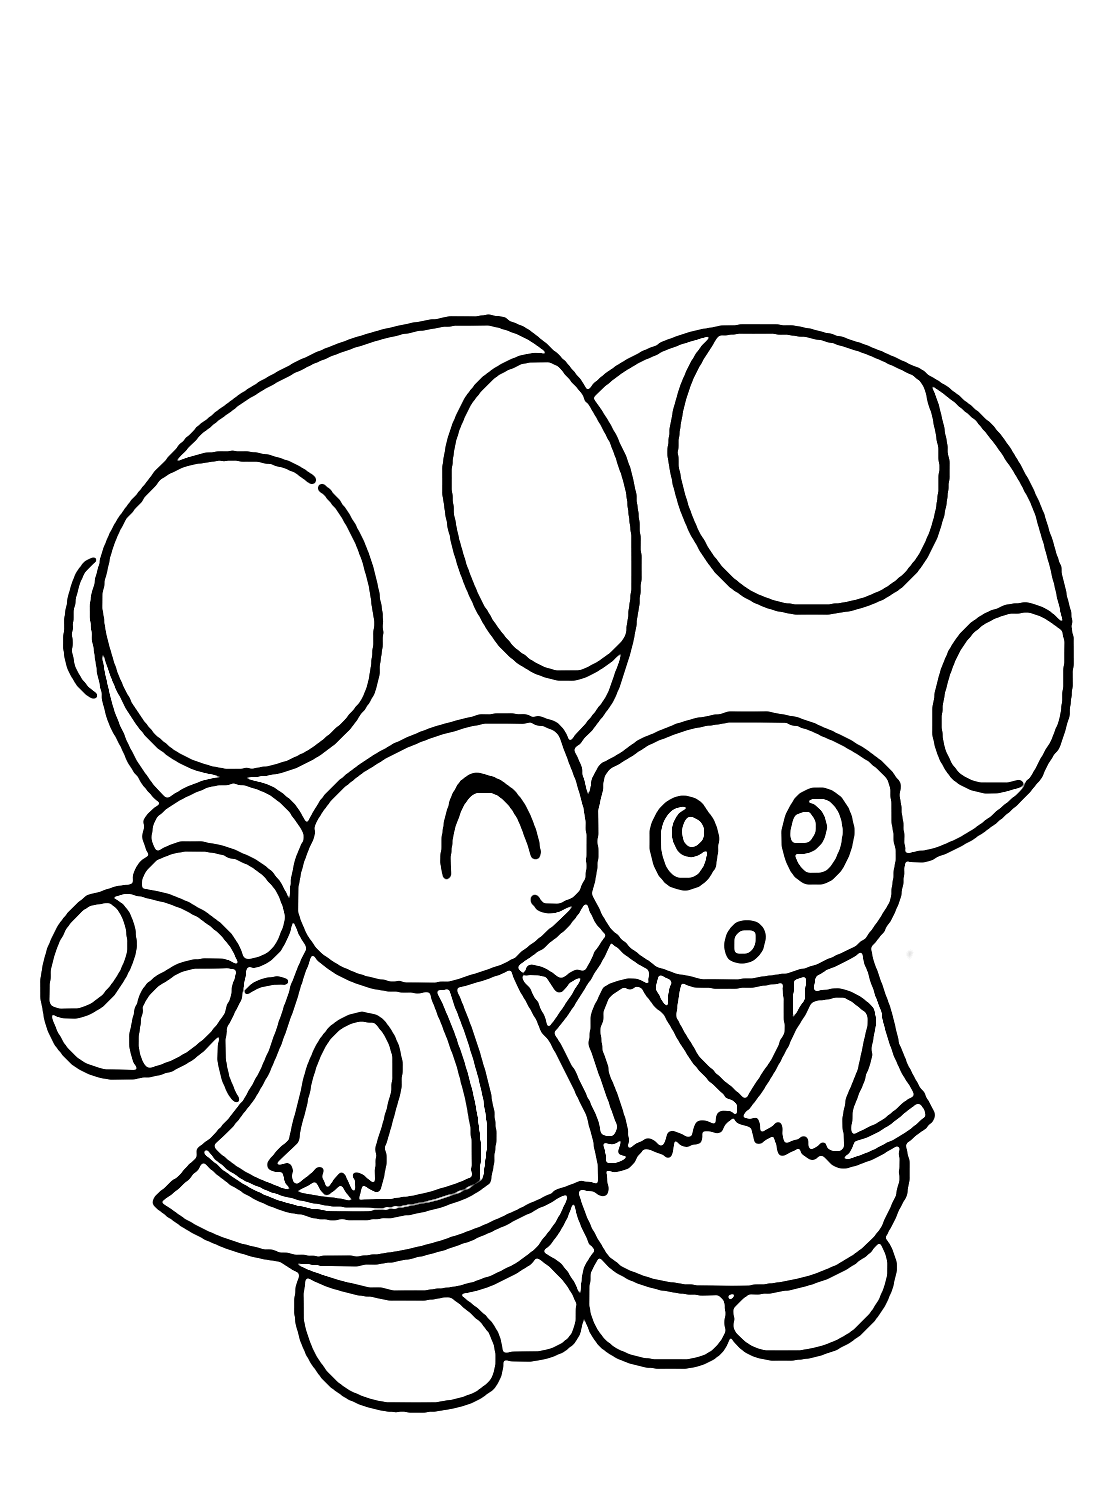 Toad and Toadette Coloring Page